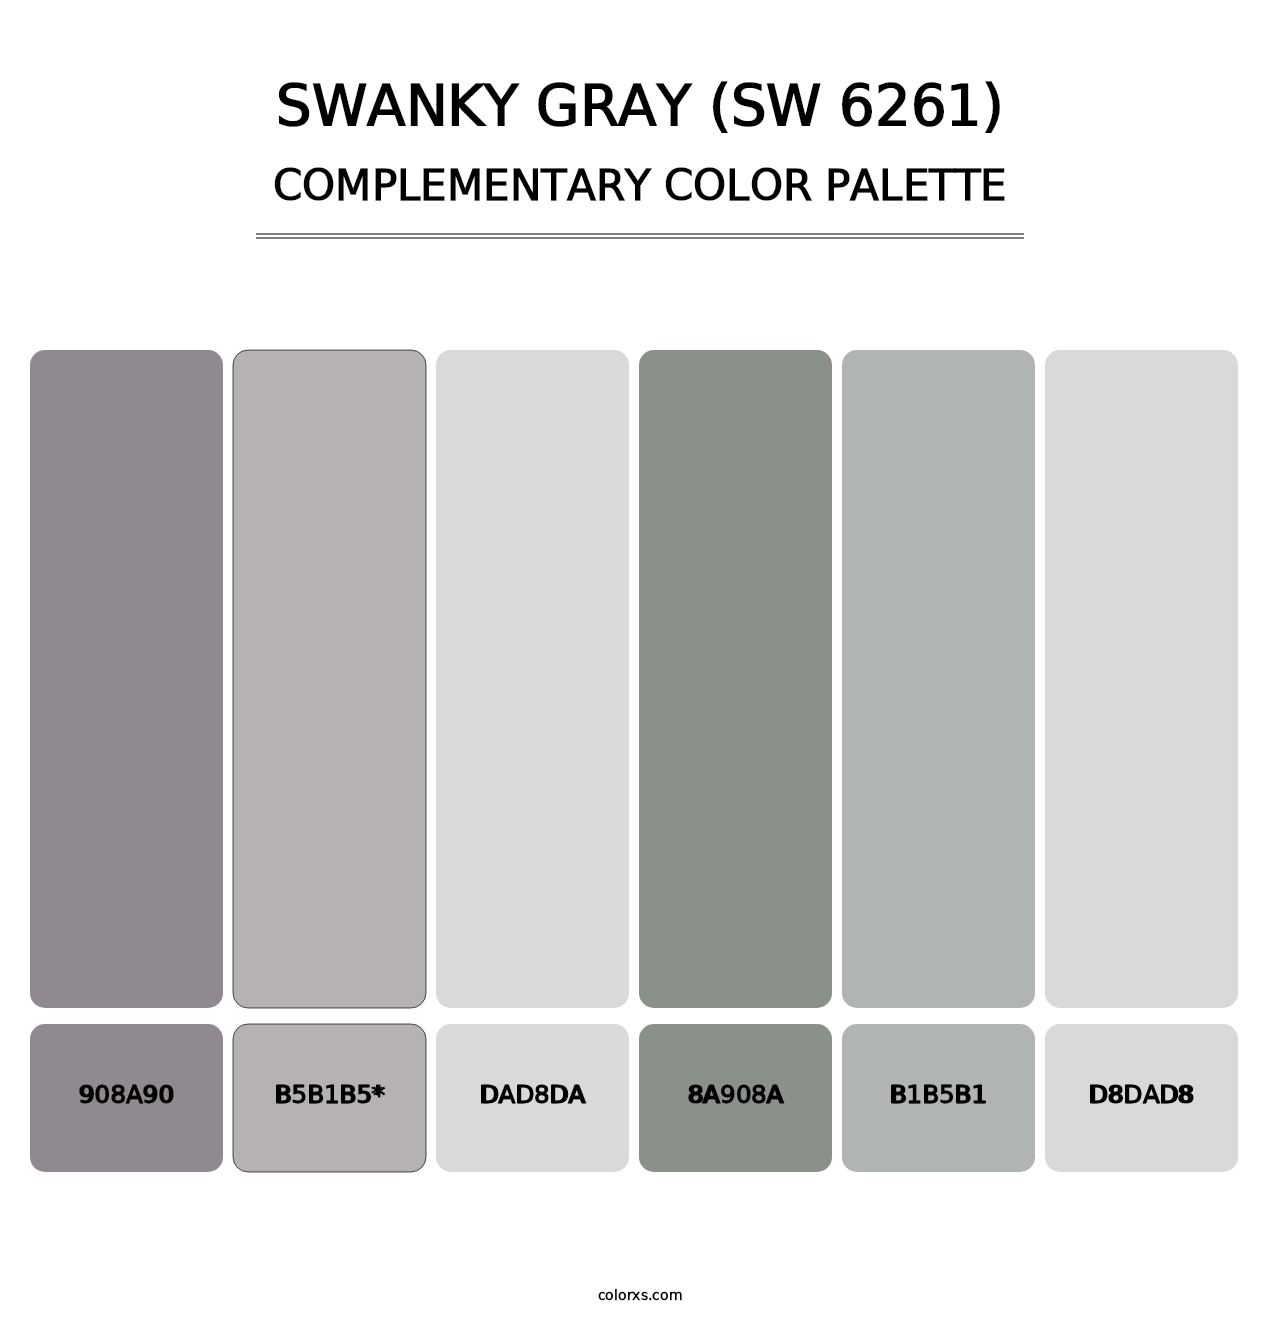 Swanky Gray (SW 6261) - Complementary Color Palette